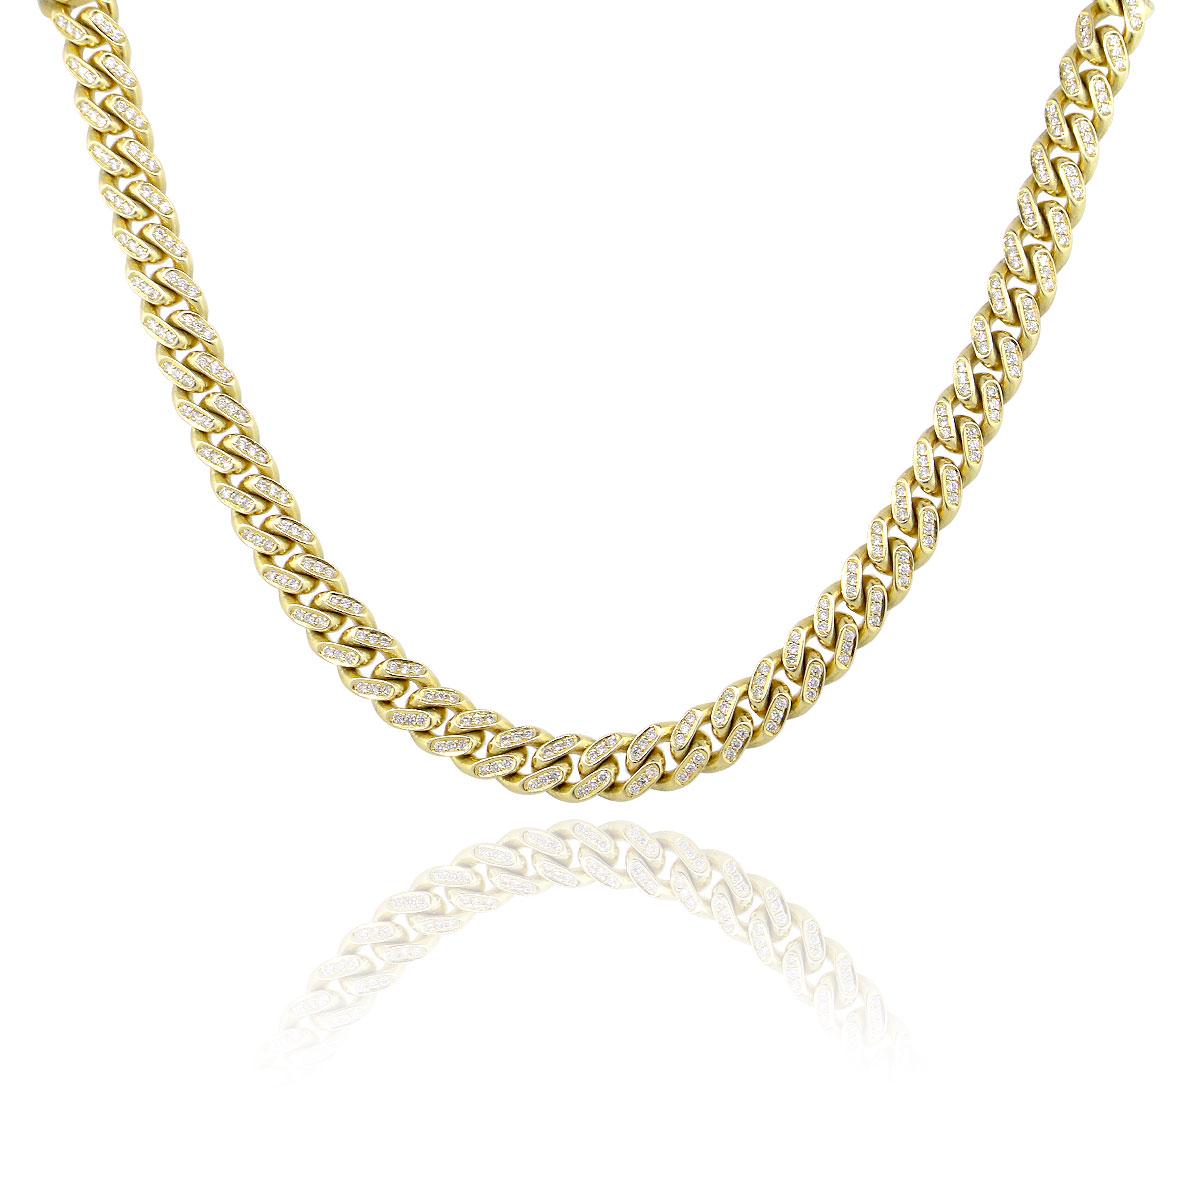 Material: 14k Yellow Gold
Diamond Details: Approx. 10ctw of round cut diamonds. Diamonds are G/H in color and VS in clarity
Measurements: Necklace measures 26